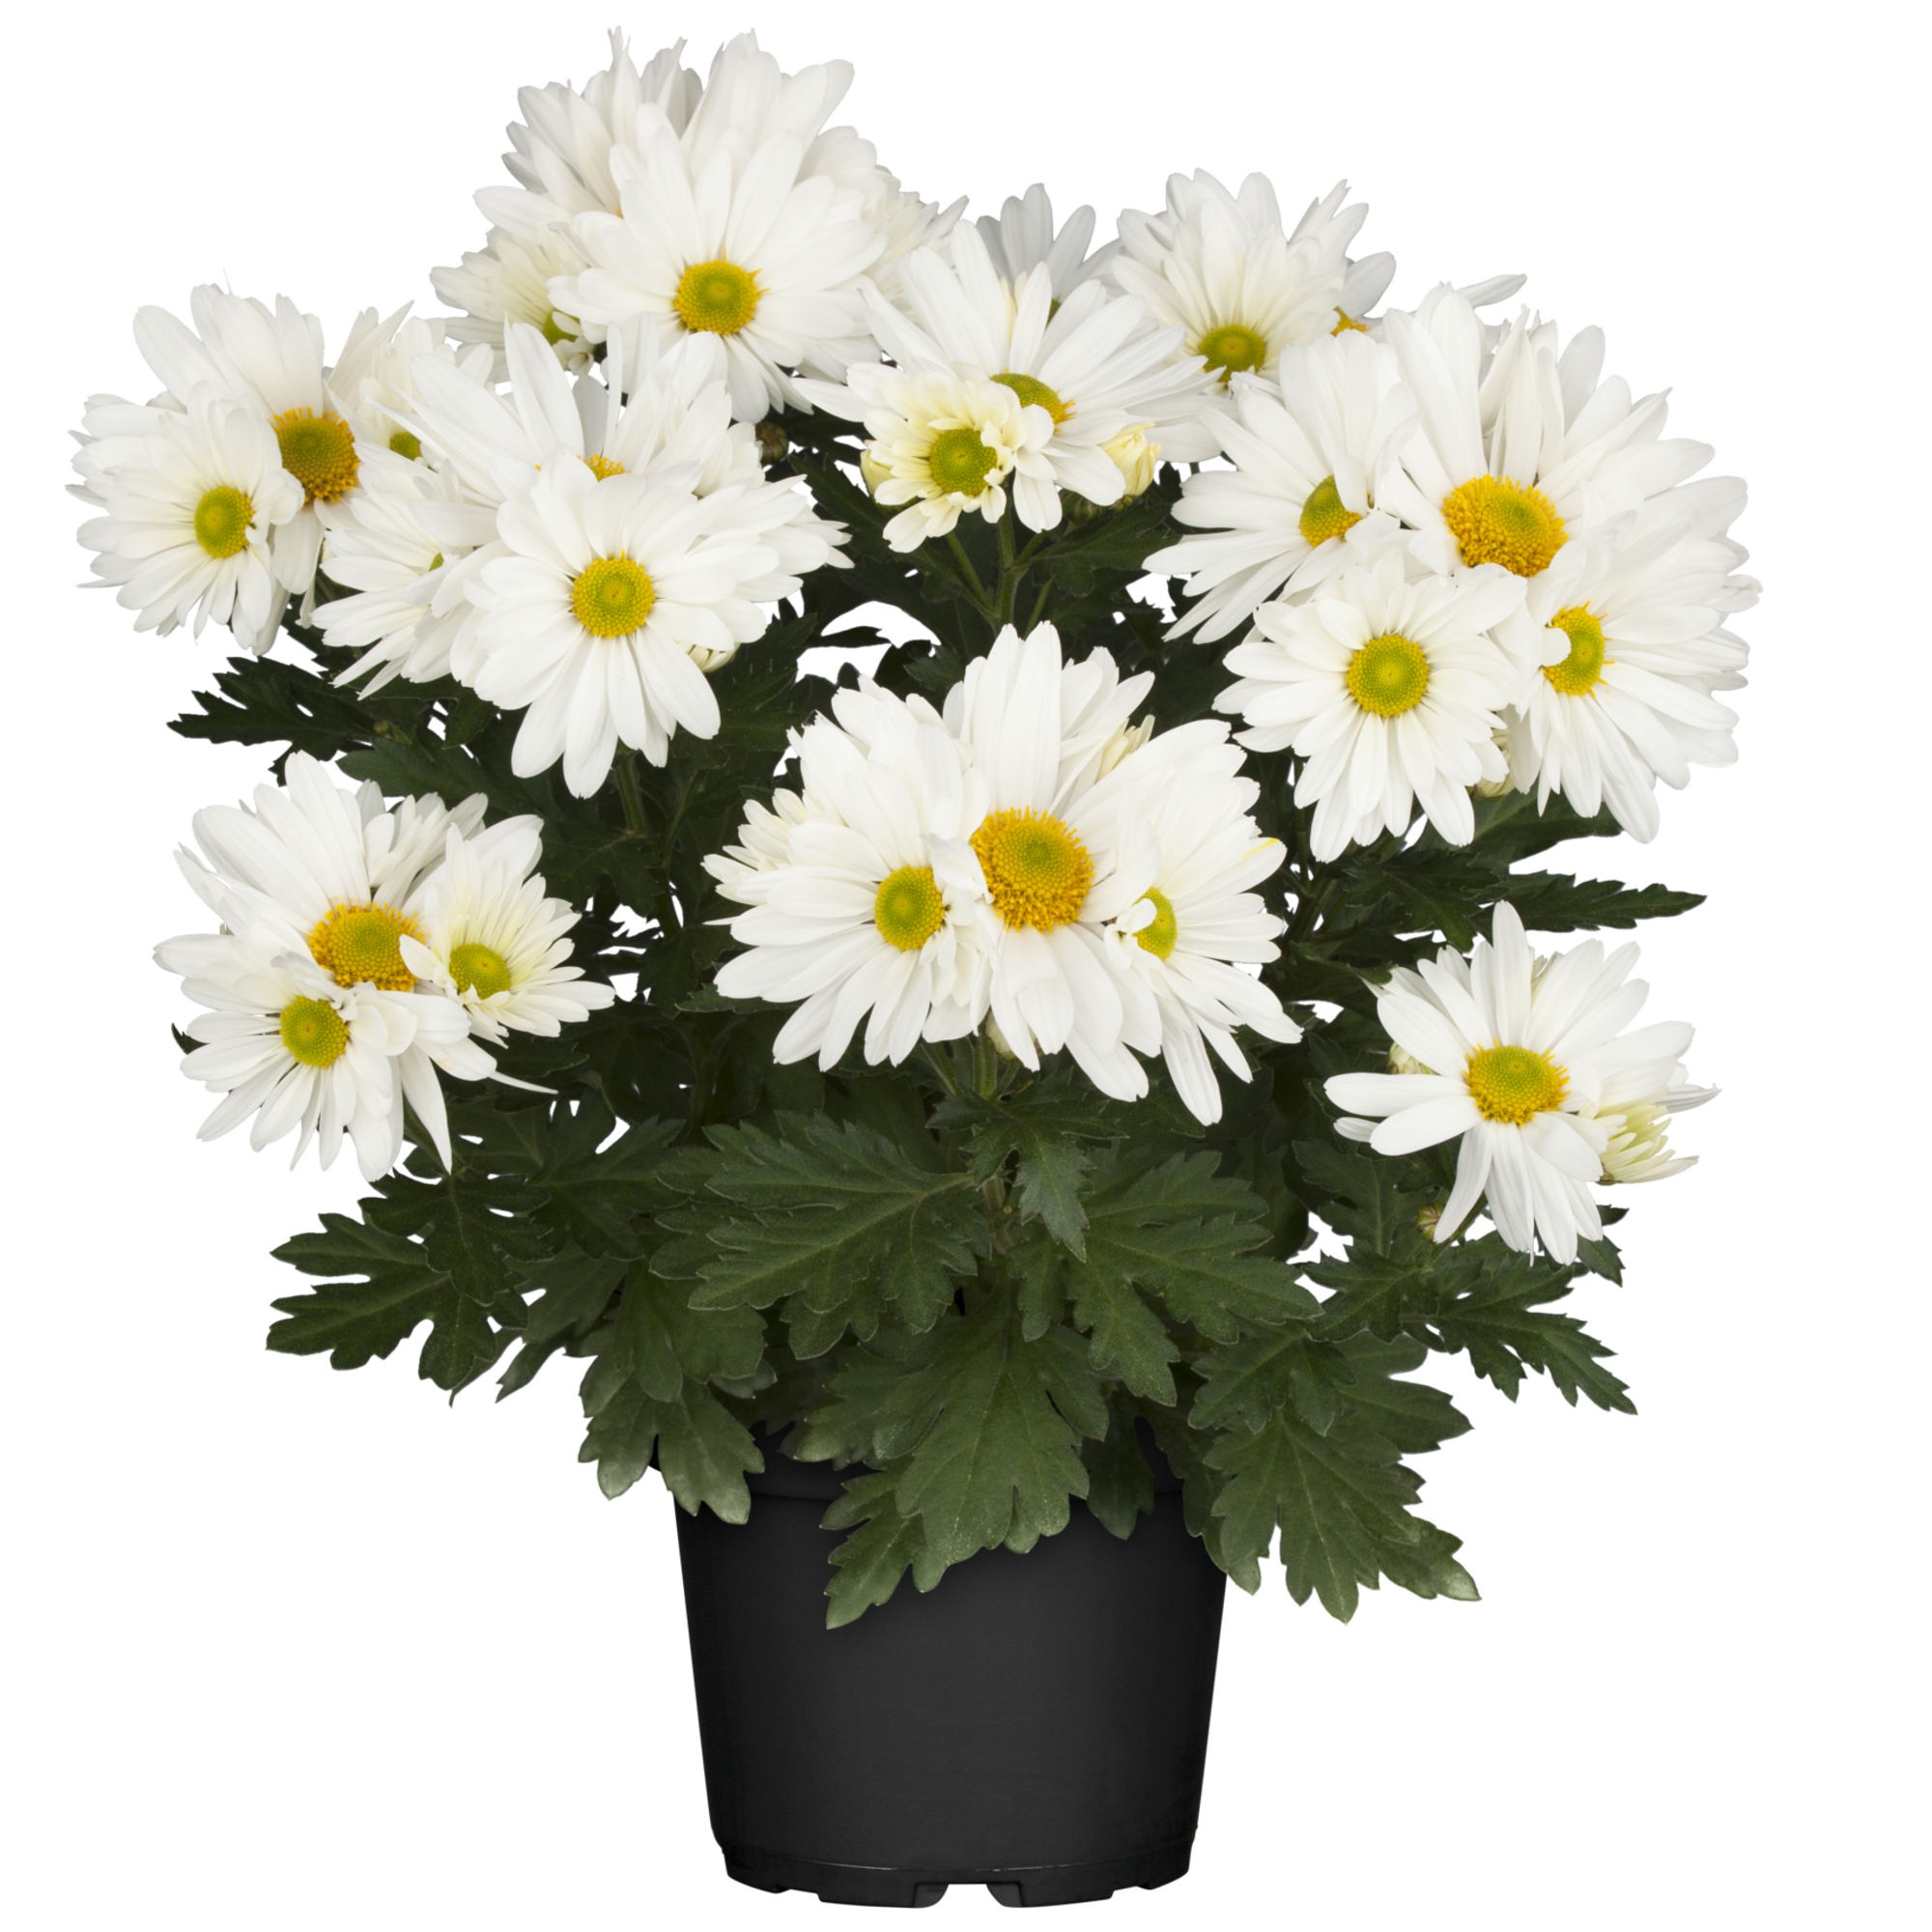 Bauernchrysantheme 13 cm Topf + product picture